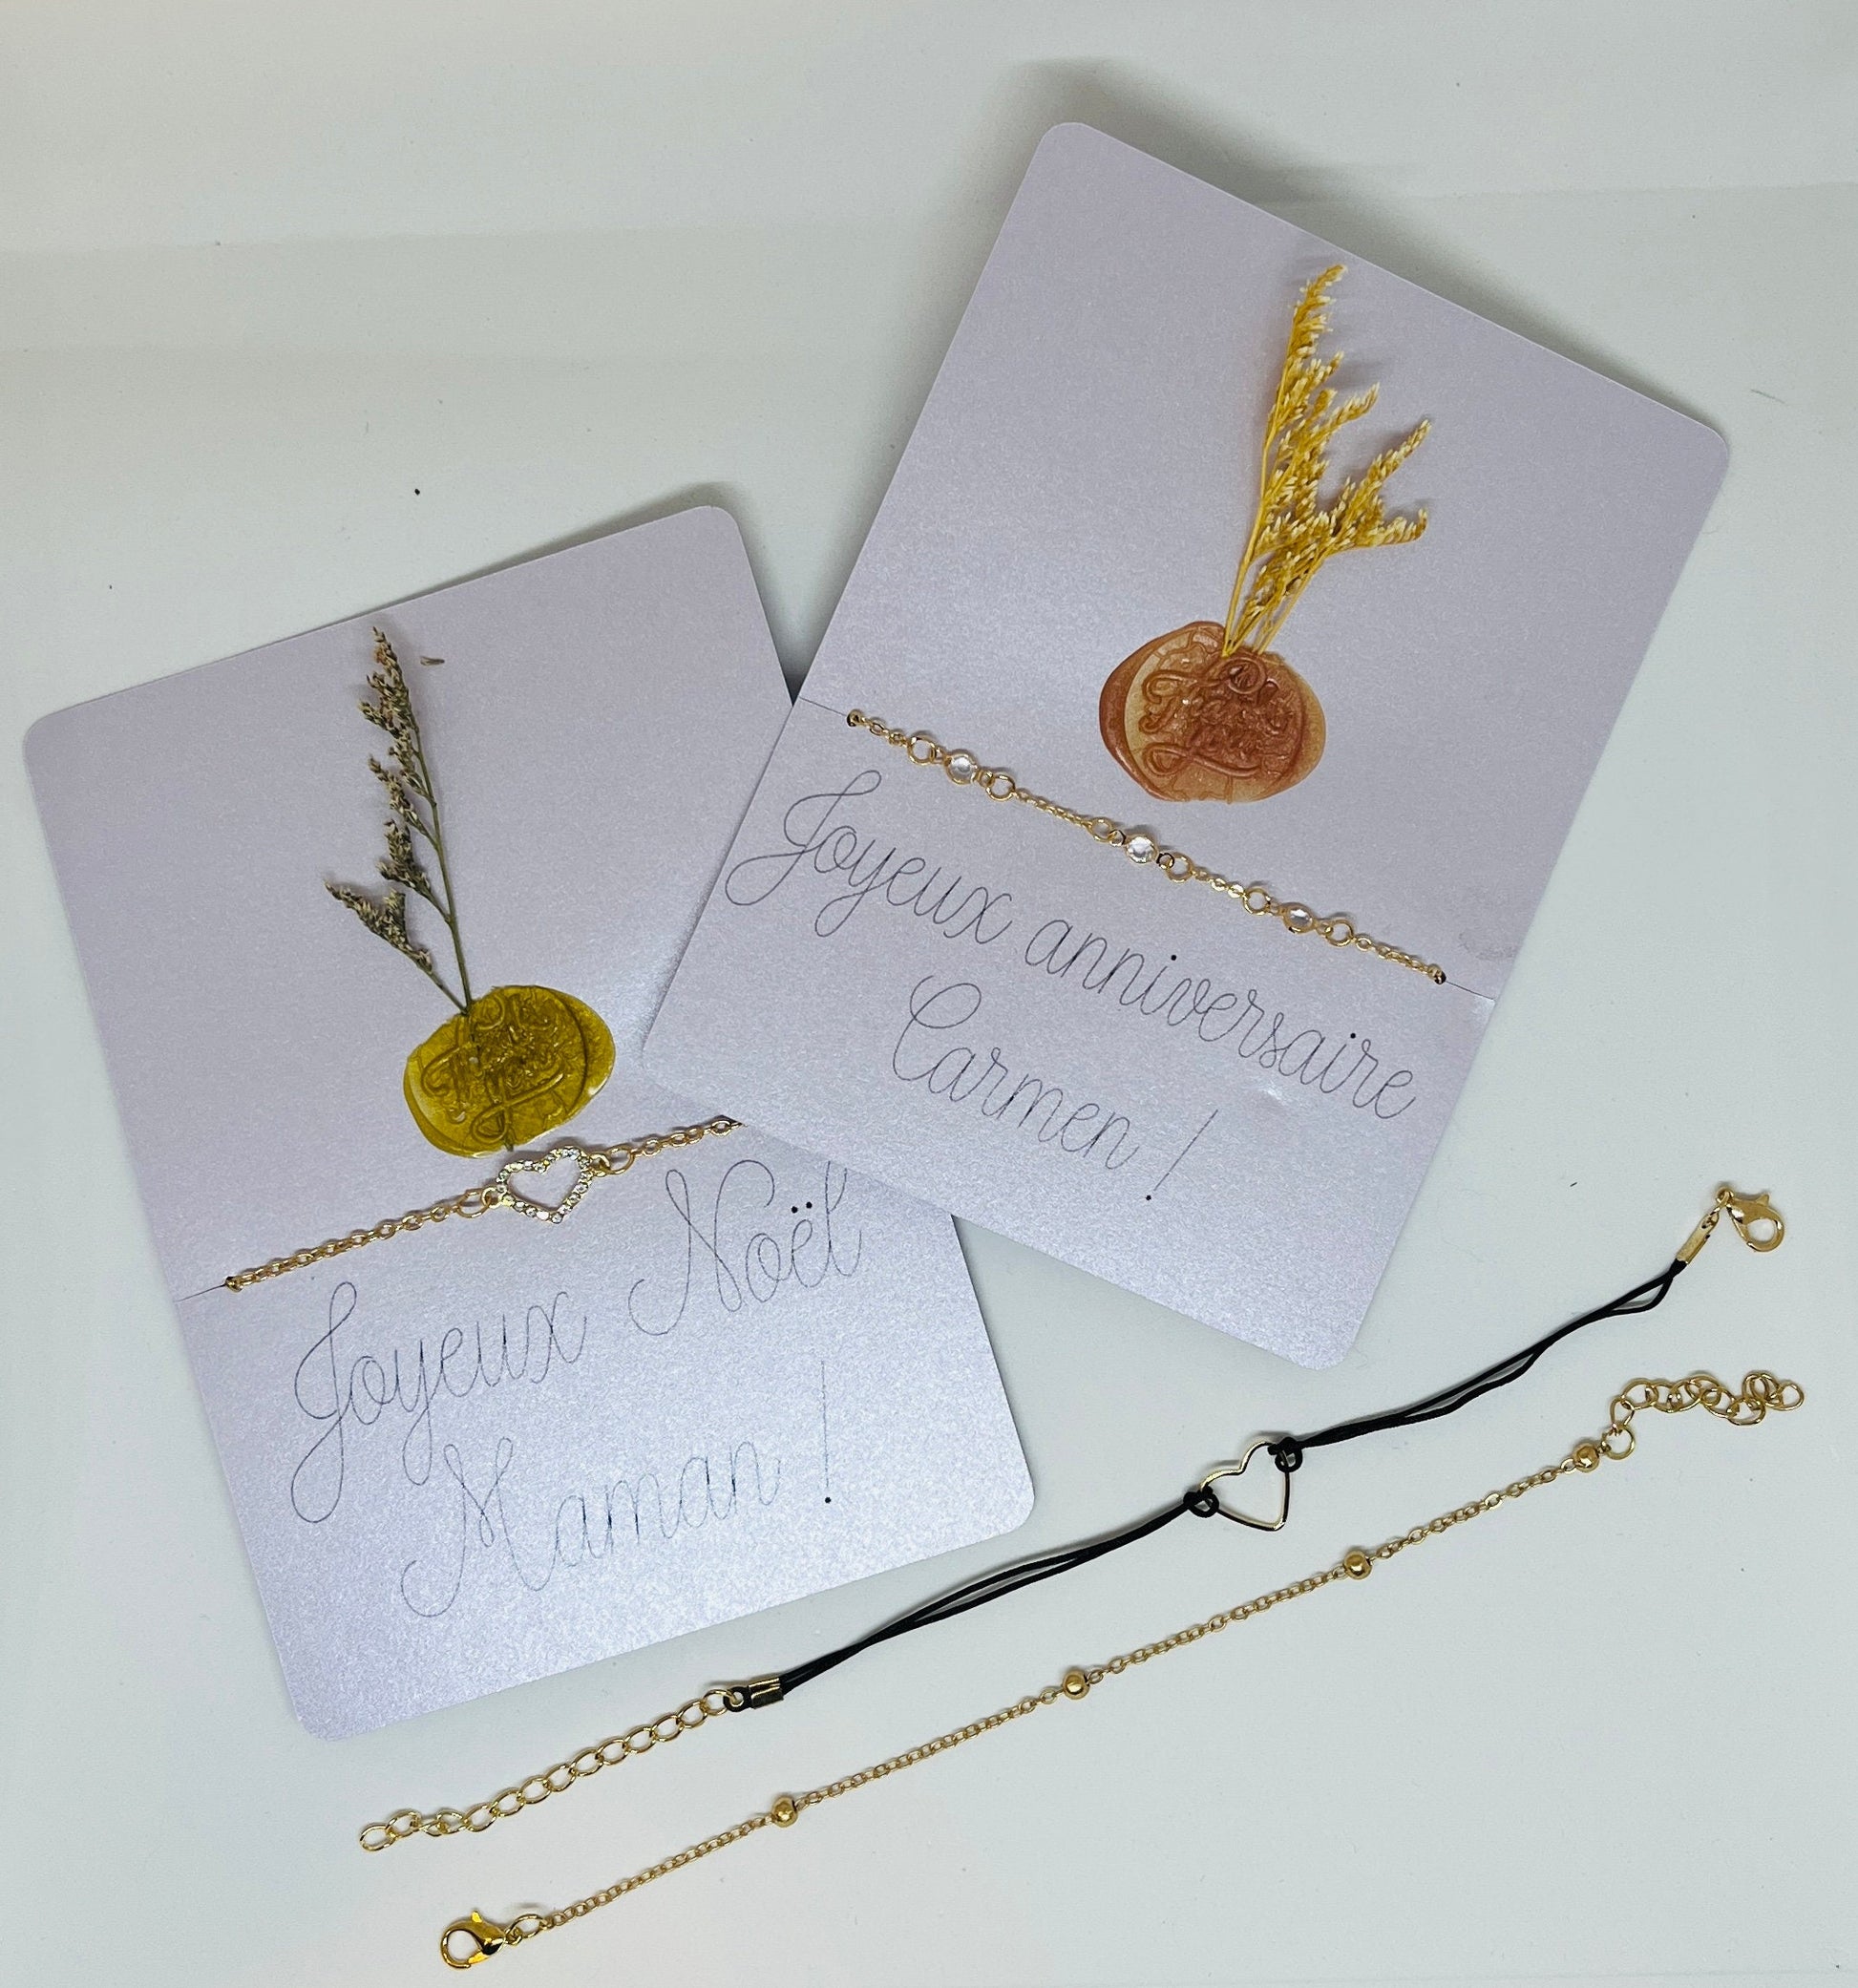 Personalized card and bracelet for all occasions, dried flowers and buckets